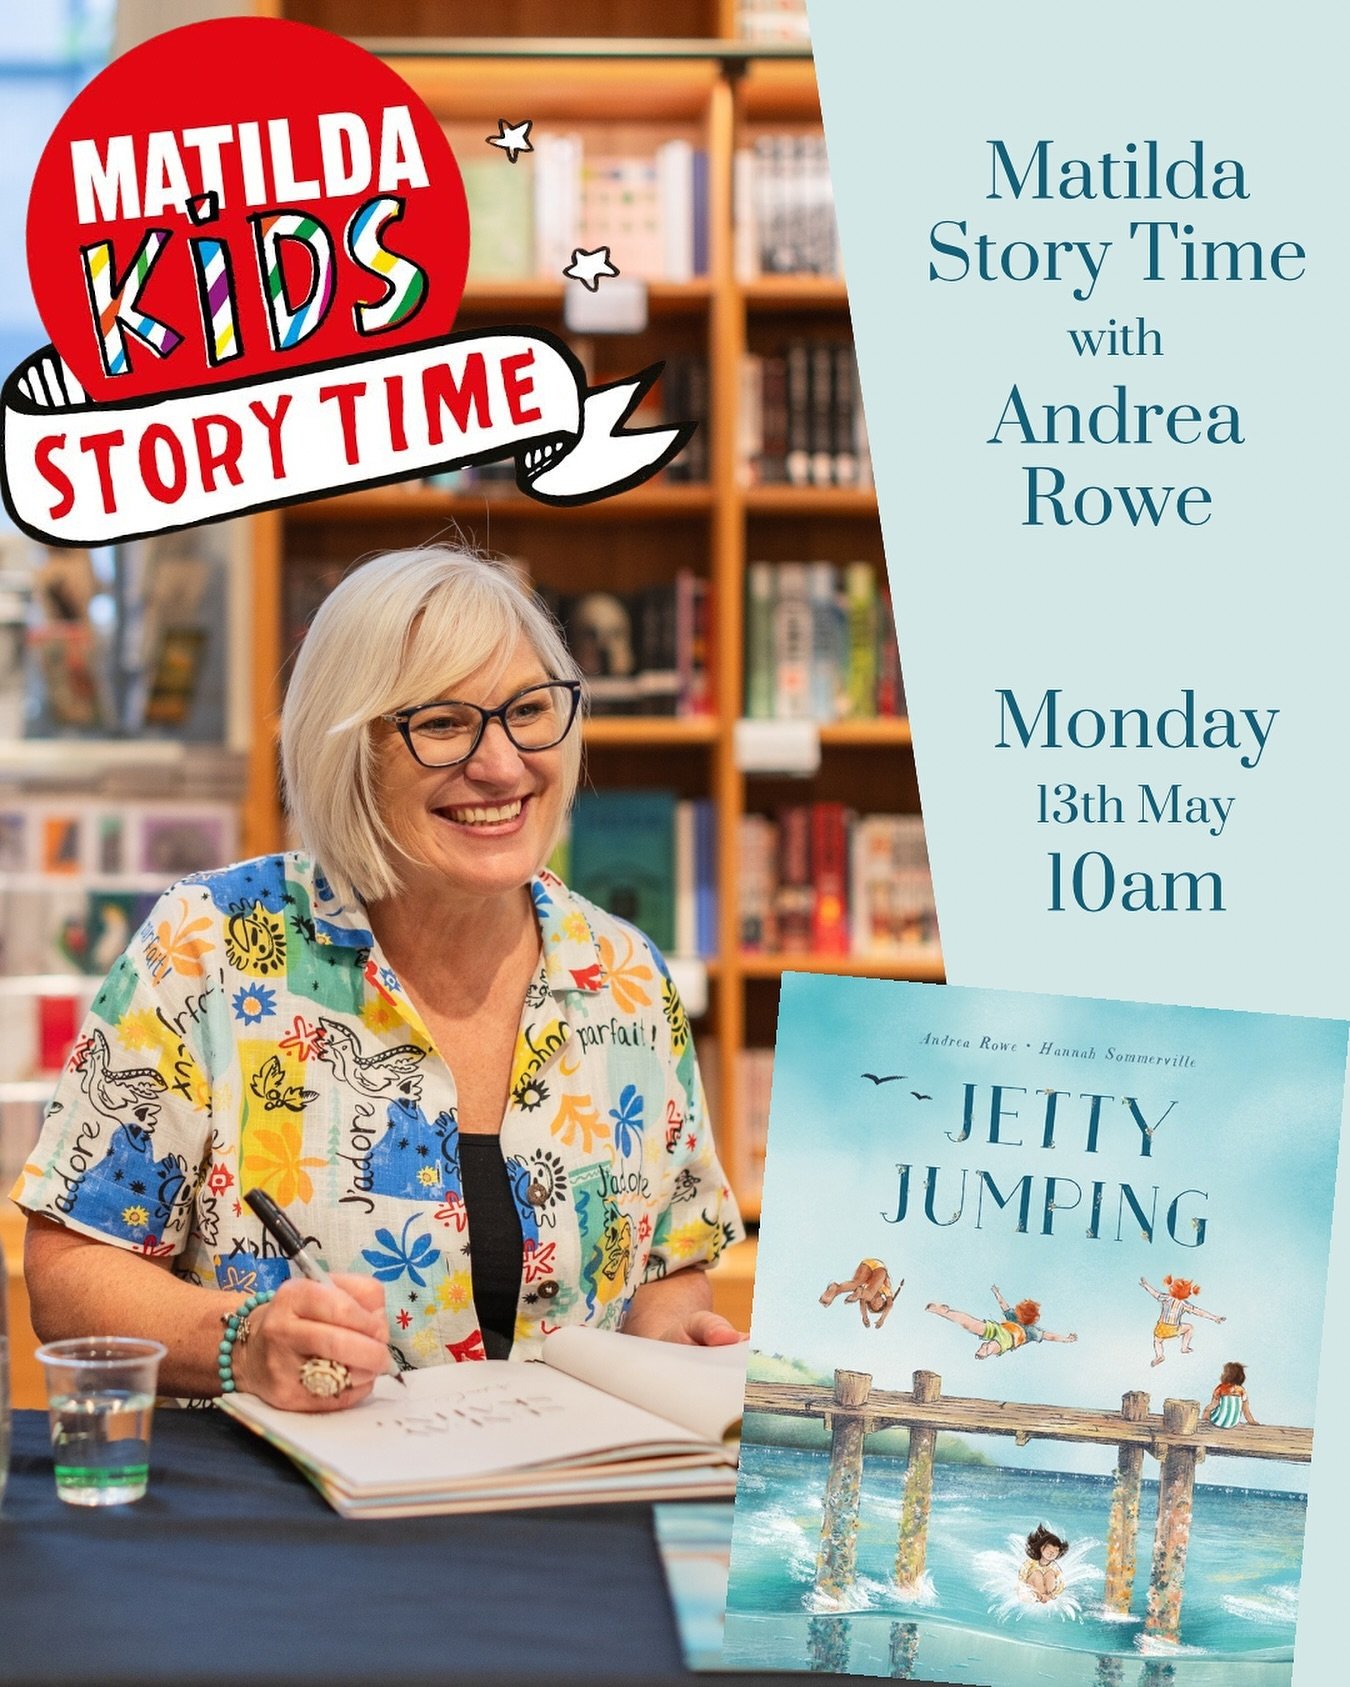 We are so excited to be able to jump into Story Time this Monday with award-winning author, Andrea Rowe. Join us in the Kid&rsquo;s Room at 10am!

Sharing her best-selling book 📕Jetty Jumping📕Andrea invites families to leap in an interactive story 